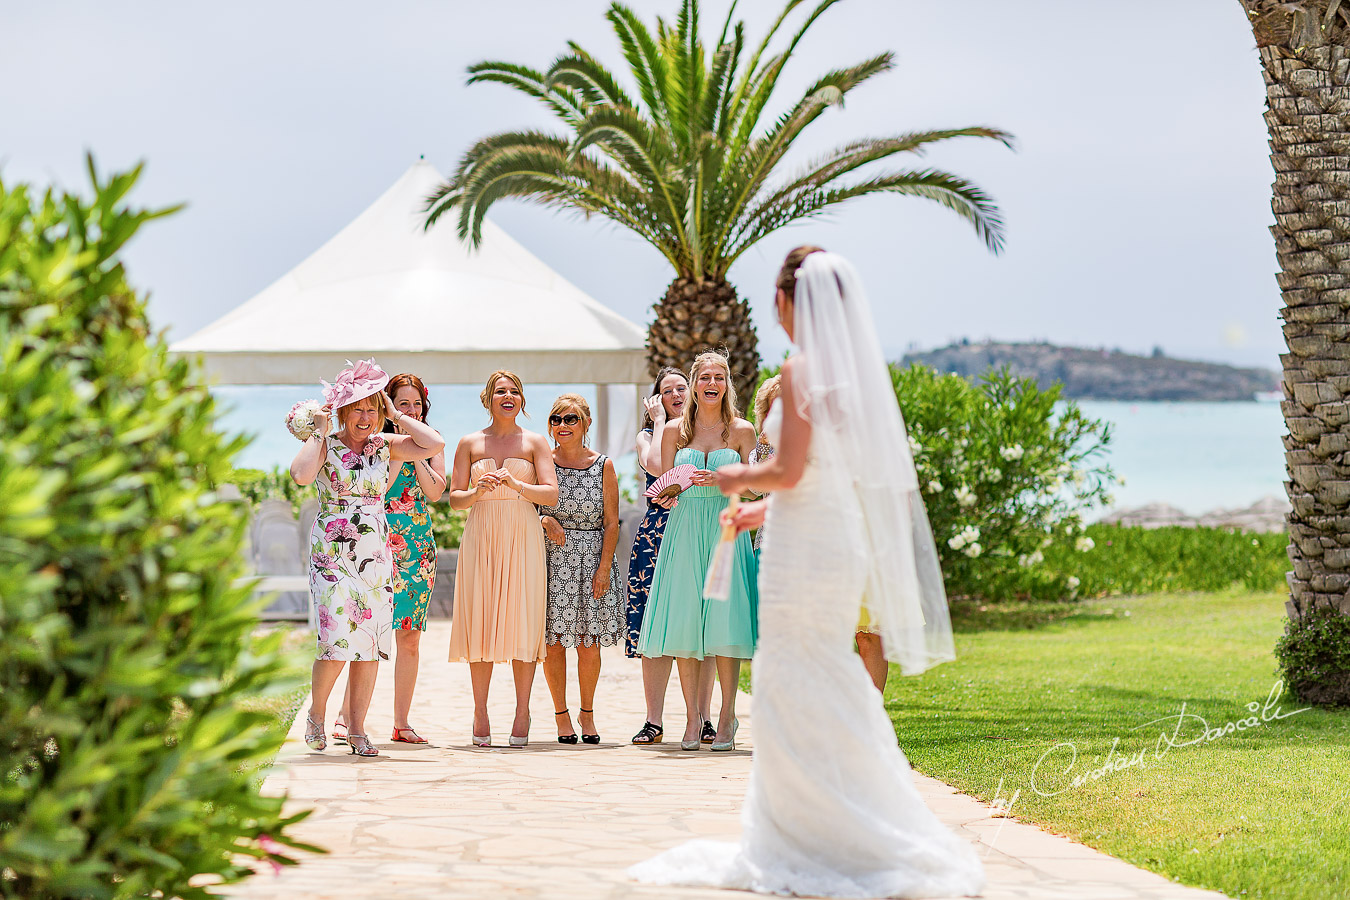 Alicia tossing the bouquet, moment photographed at Nissi Beach Resort in Ayia Napa, Cyprus by Cristian Dascalu.